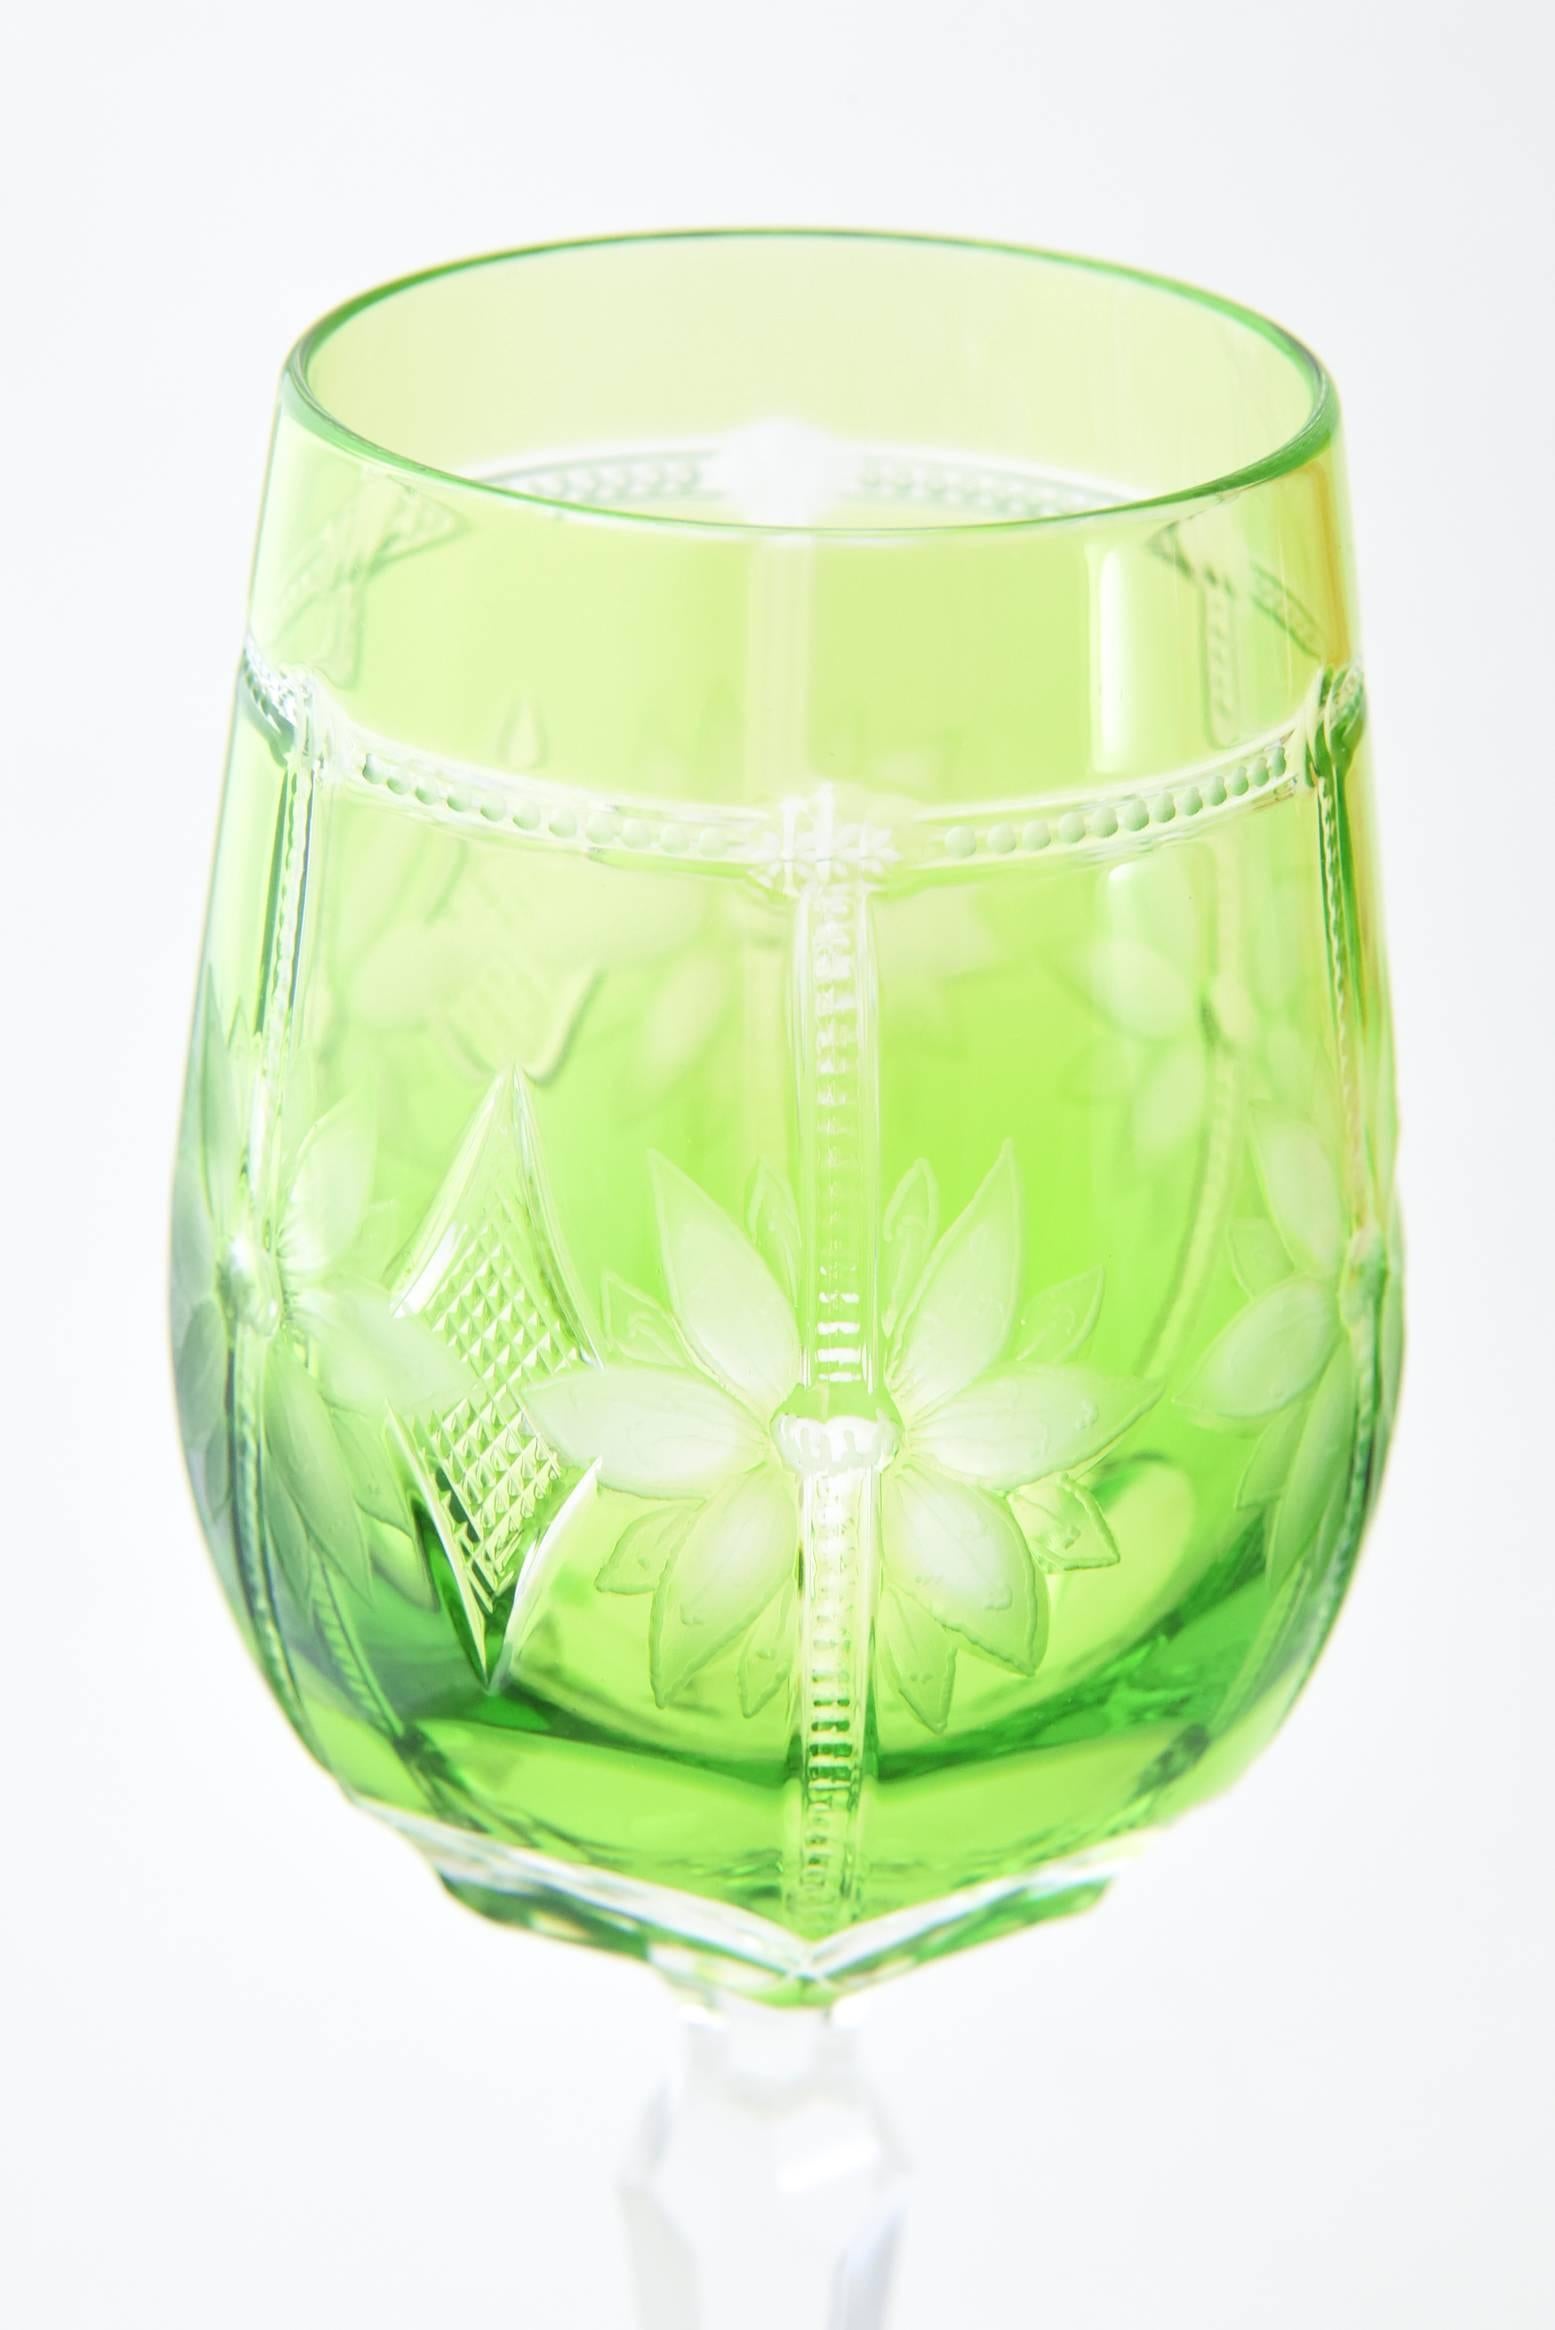 Hungarian Four Hand-Cut Floral Crystal Water Glasses by Varga Avignon